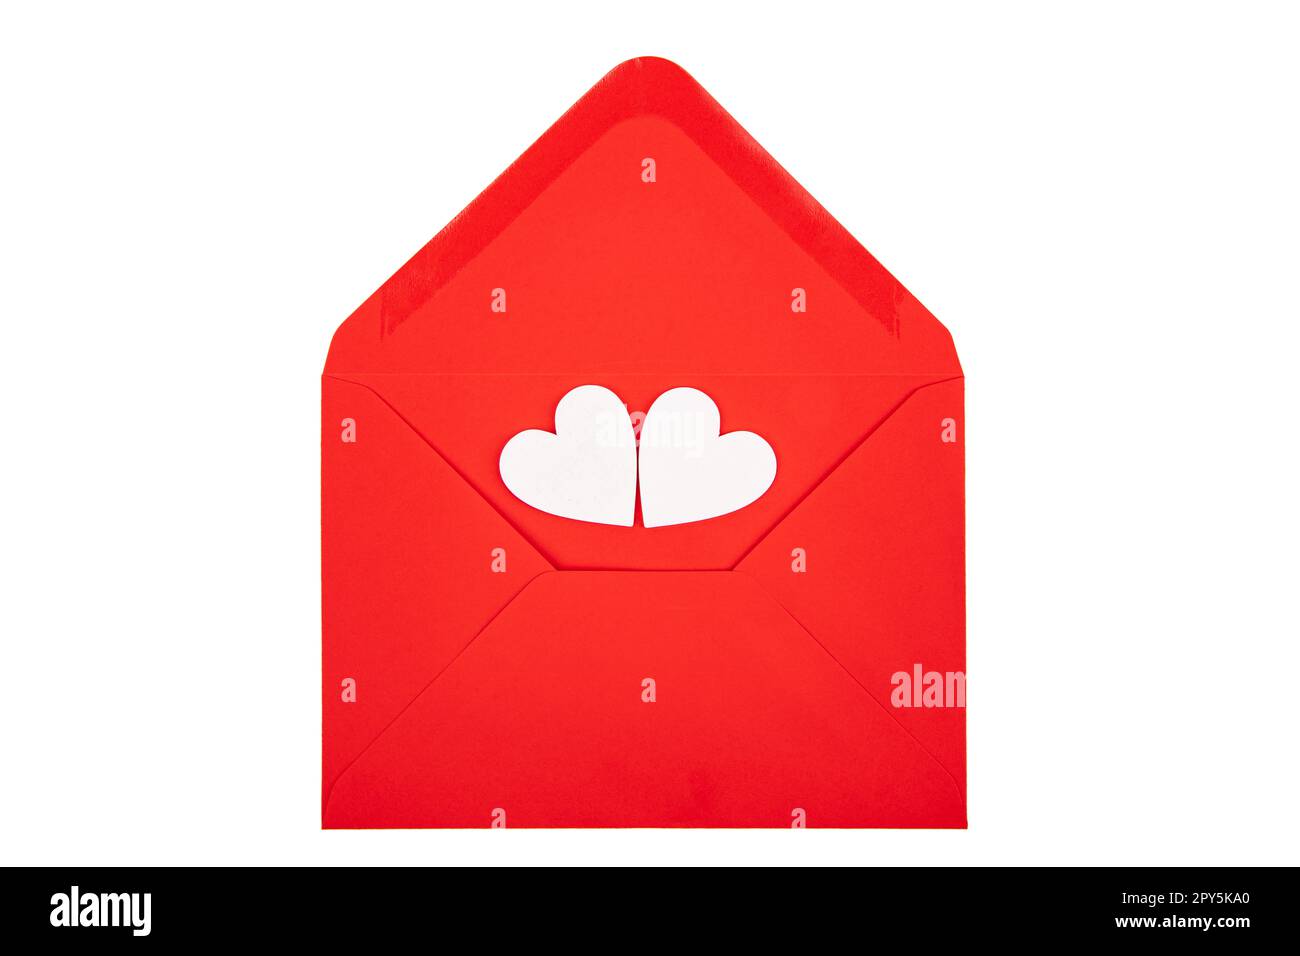 Red envelope Stock Photos, Royalty Free Red envelope Images